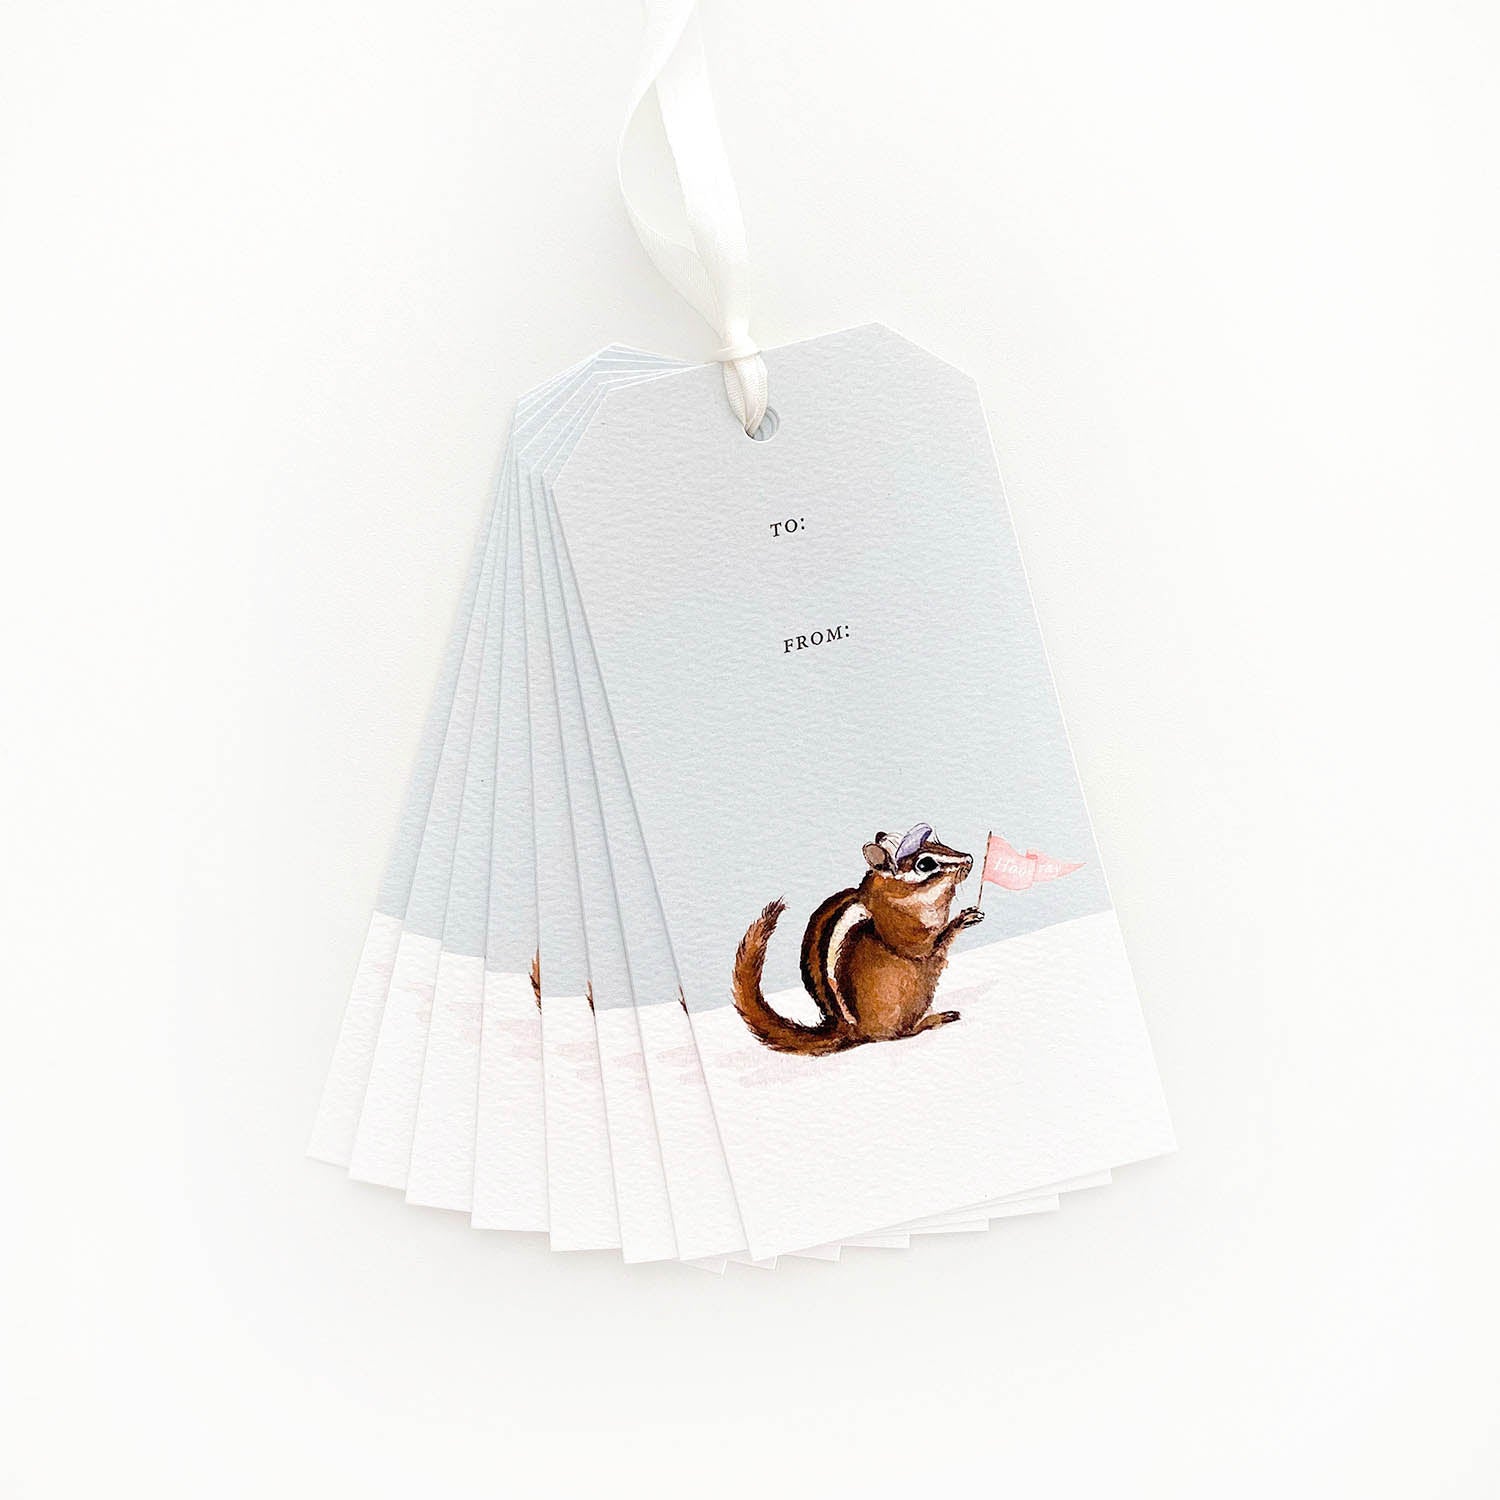 Chip Chip Hooray Gift Tags